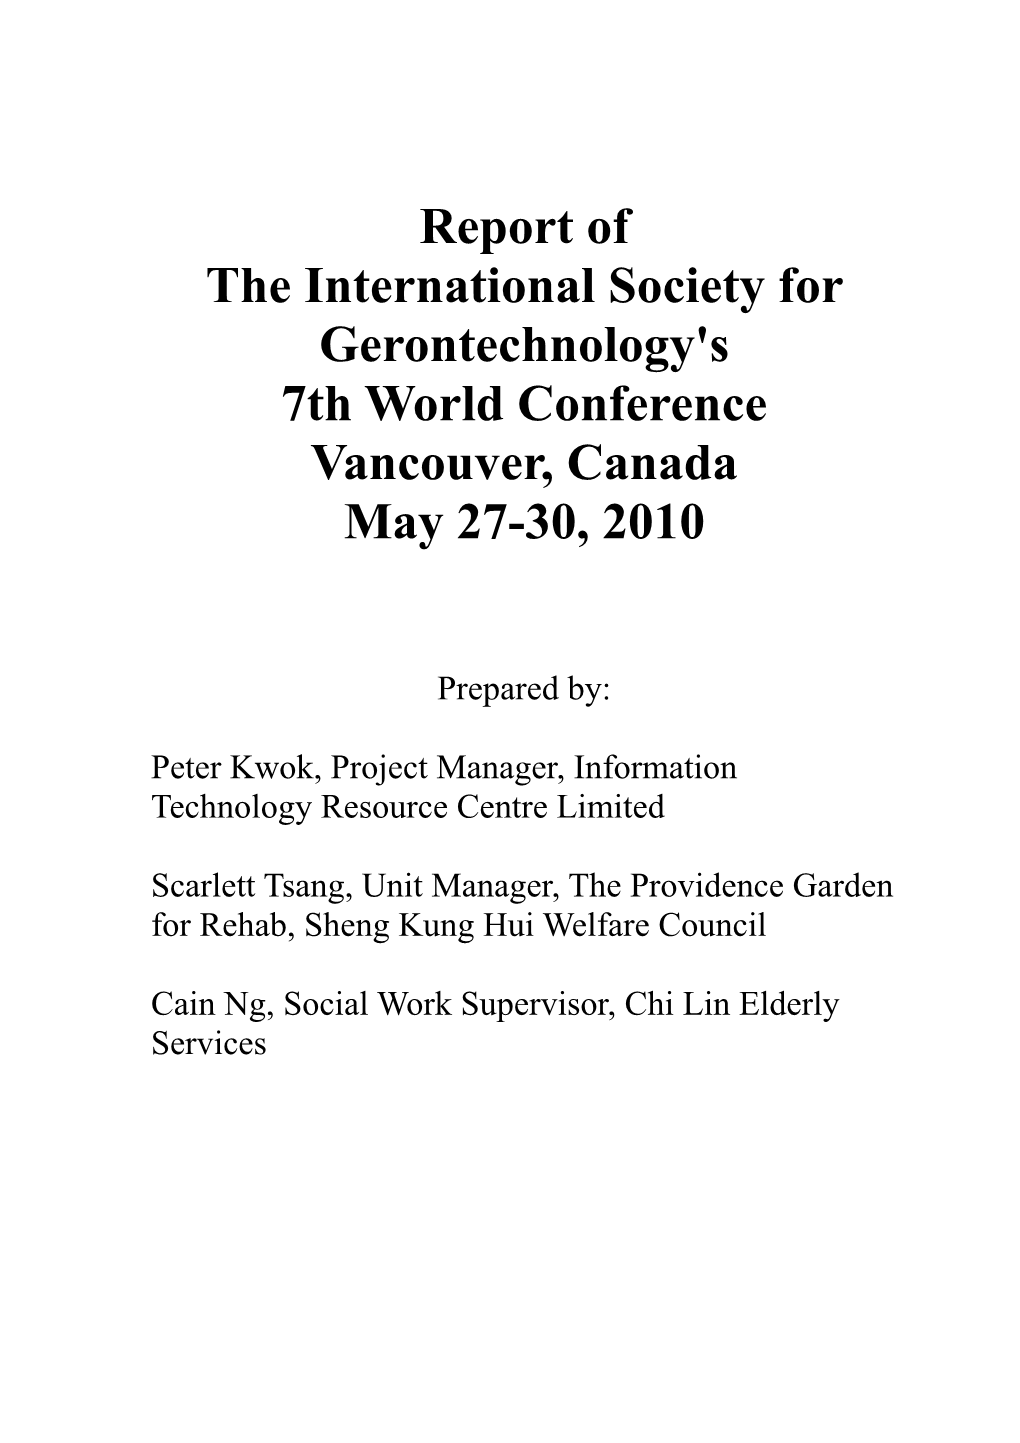 The International Society for Gerontechnology's 7Th World Conference